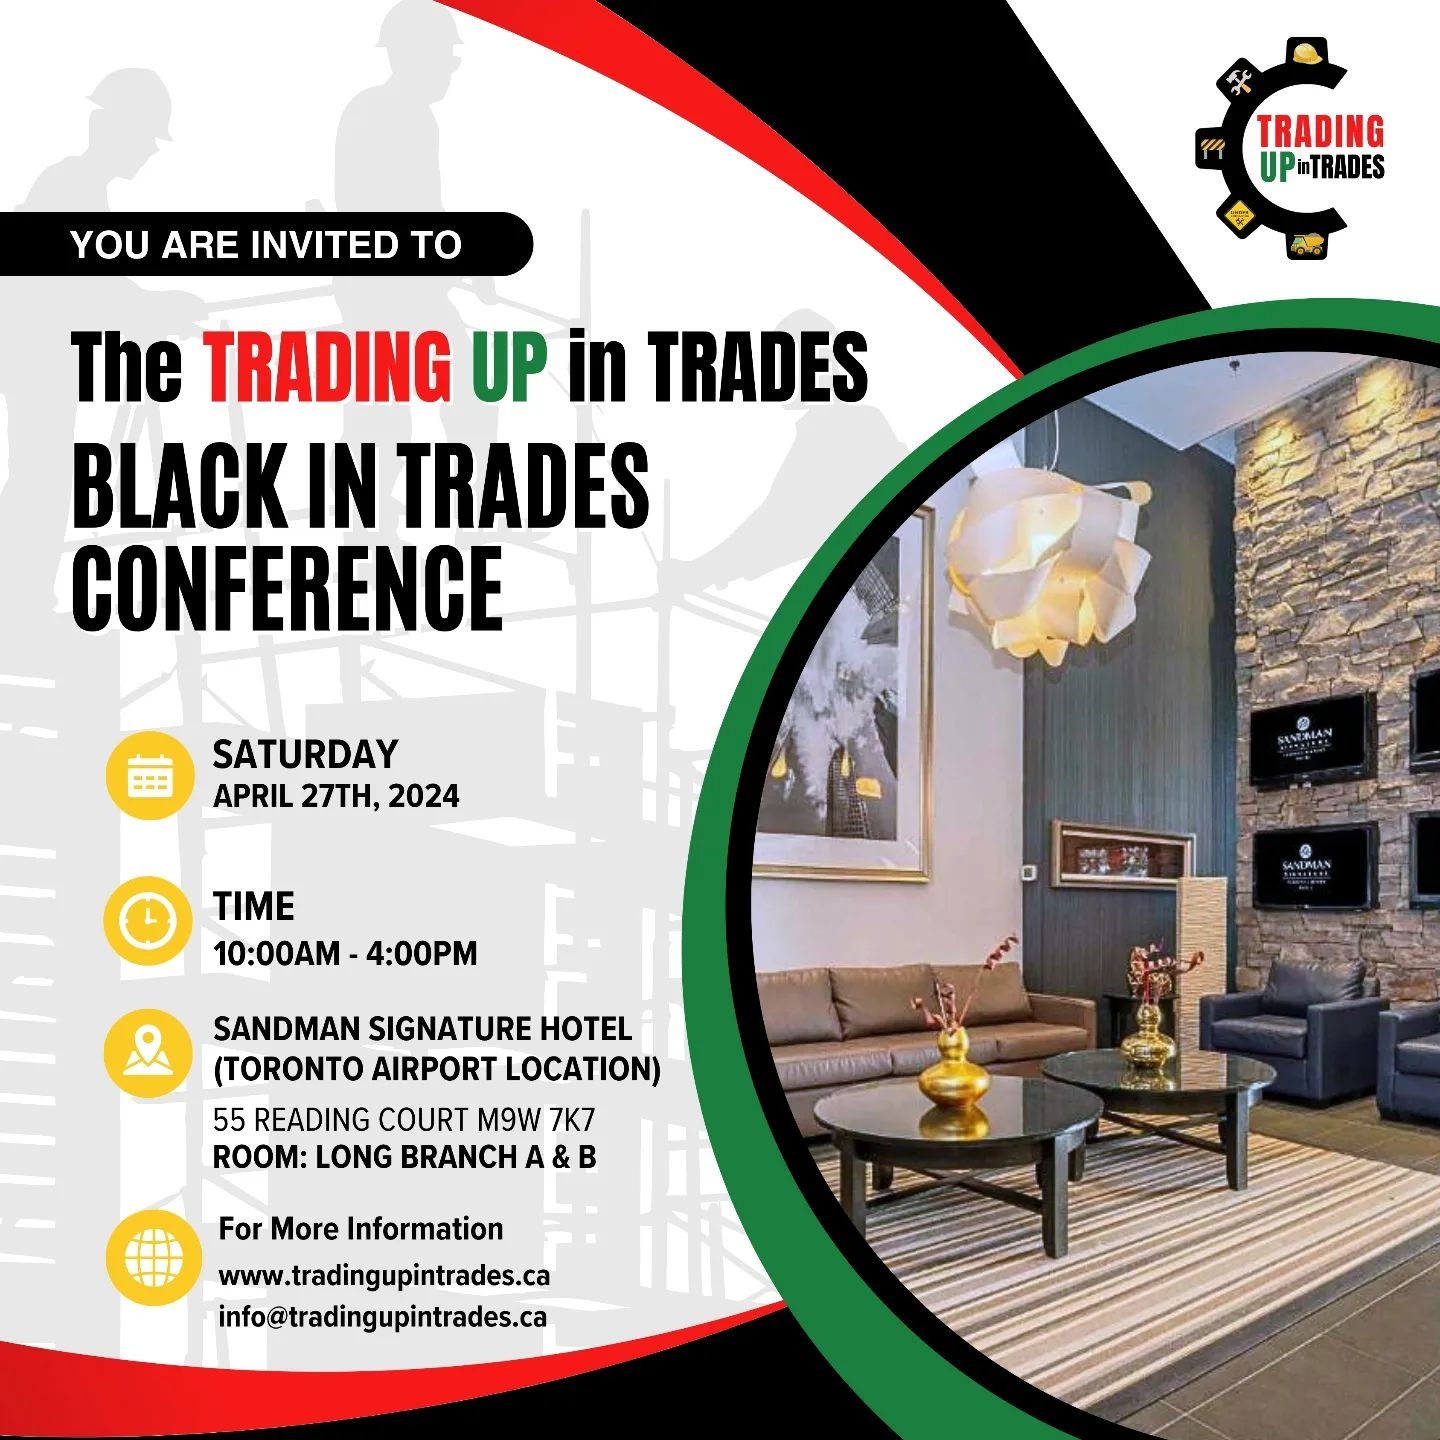 🗣️ CHECK YOUR EMAILS 📩

The INVITATIONS to our Black Trades Conference were sent out 🙌🏾

We can't wait to see you 😊

www.tradingupintrades.ca